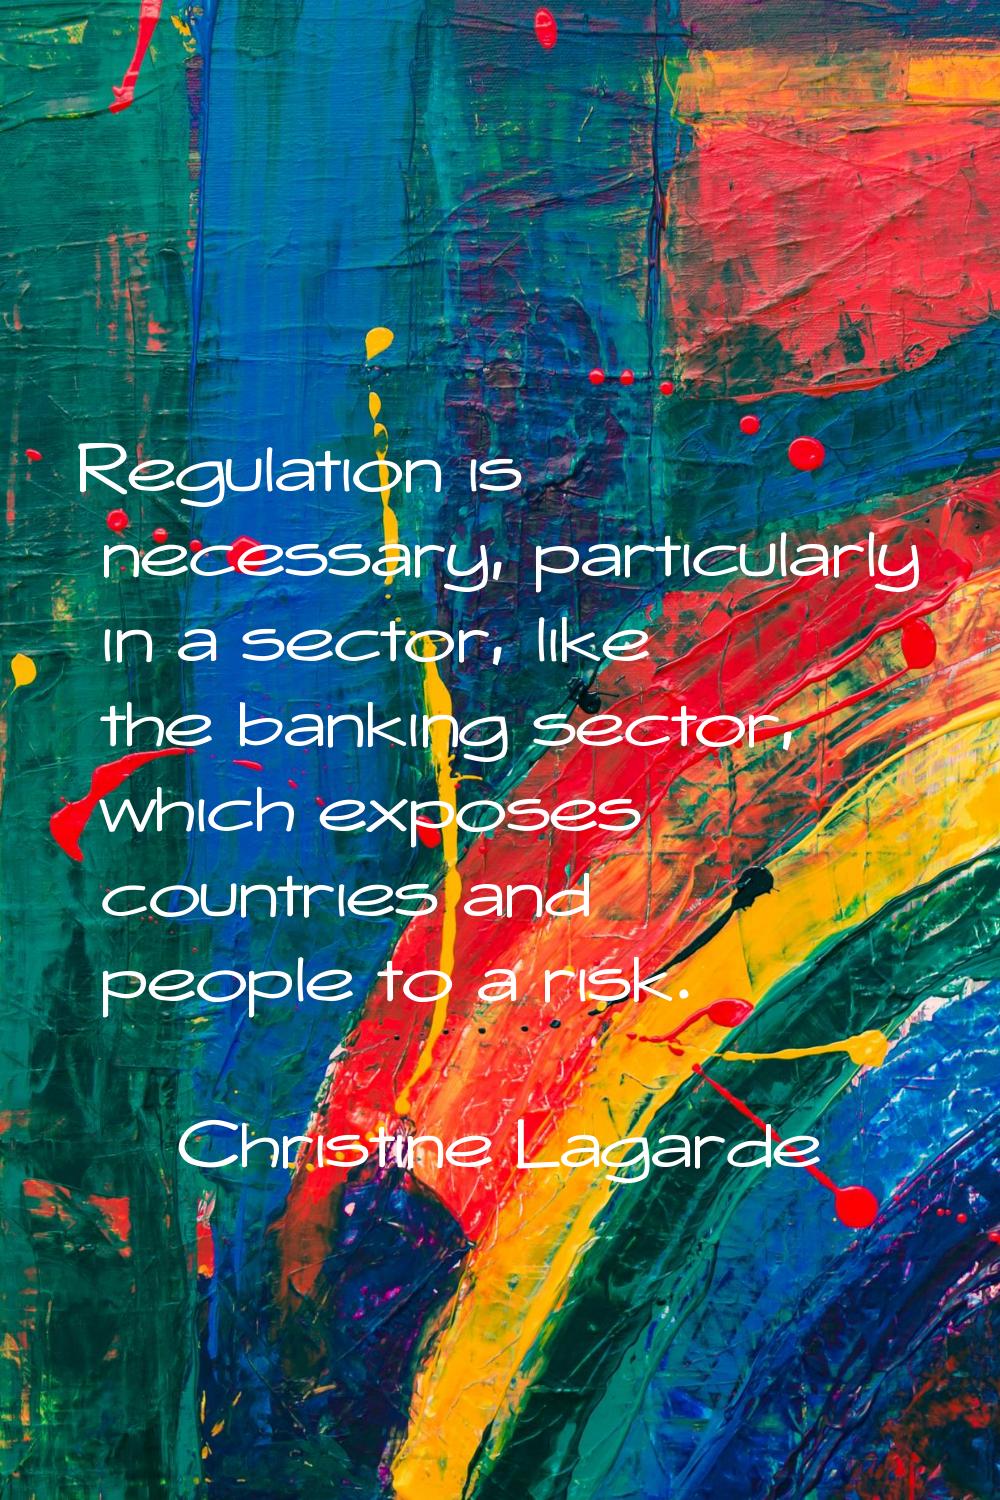 Regulation is necessary, particularly in a sector, like the banking sector, which exposes countries